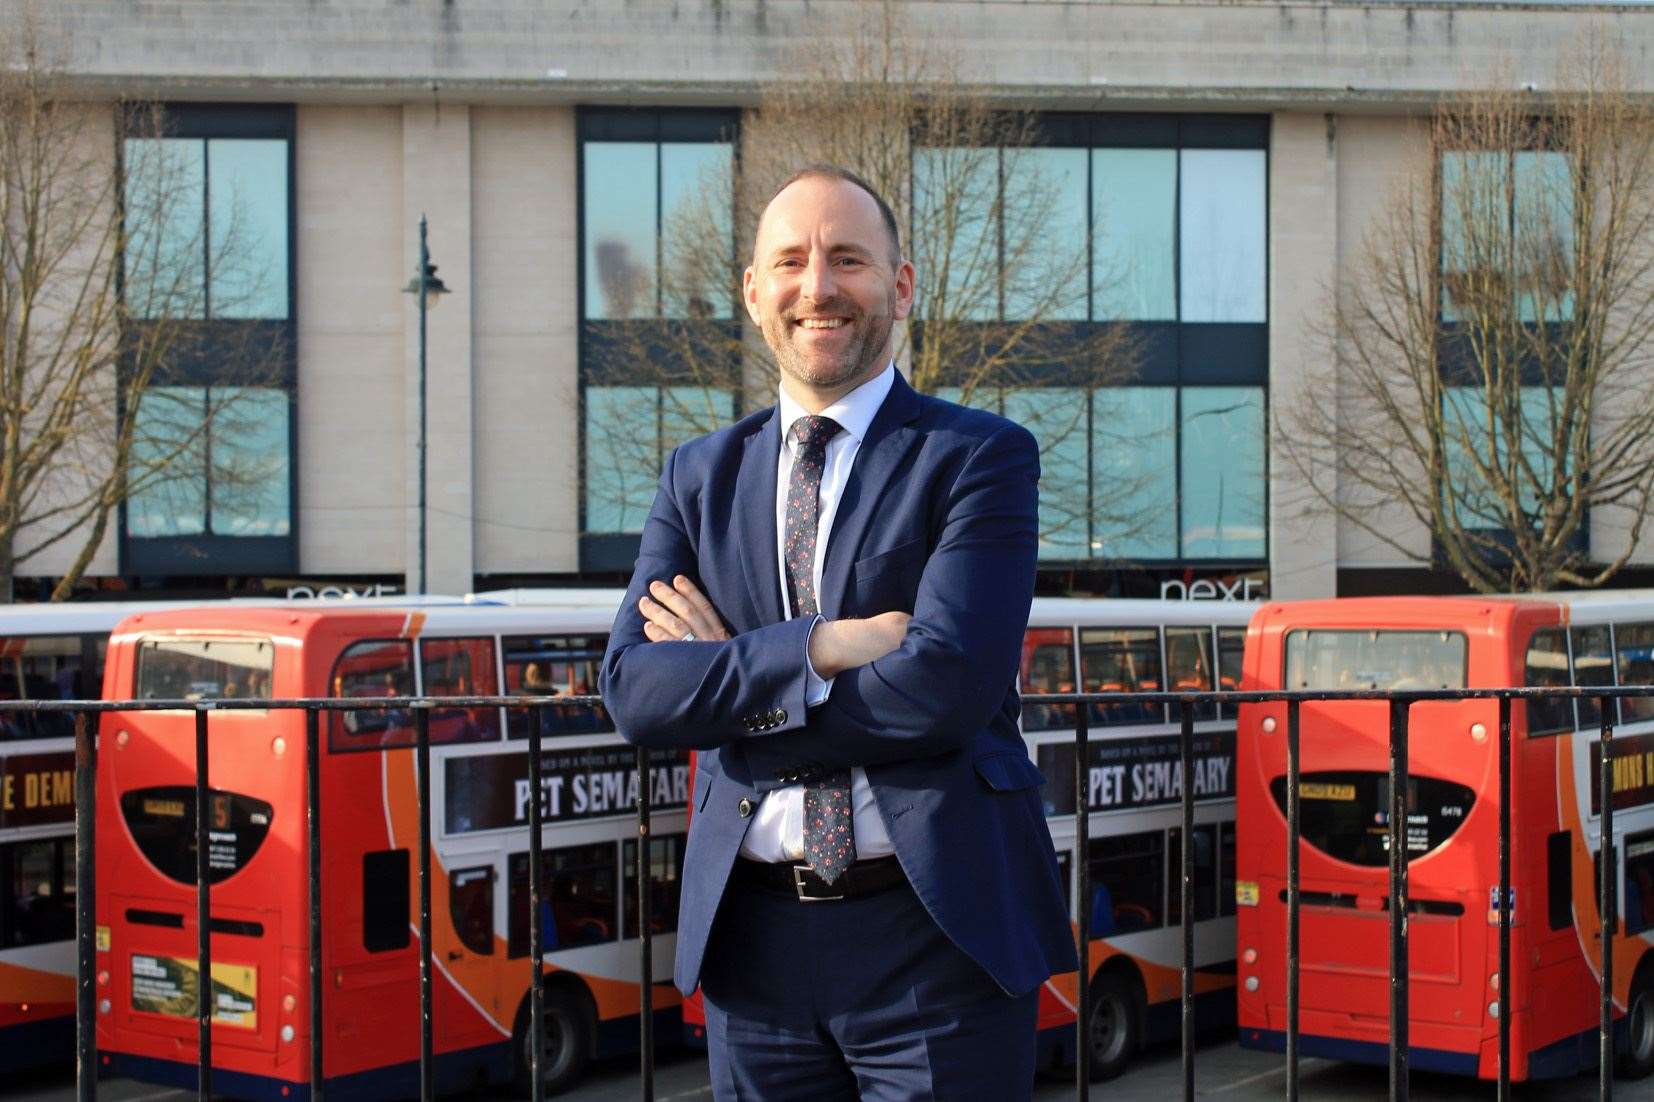 Stagecoach South East’s Managing Director Joel Mitchell expressed concern at the rise of attacks on drivers